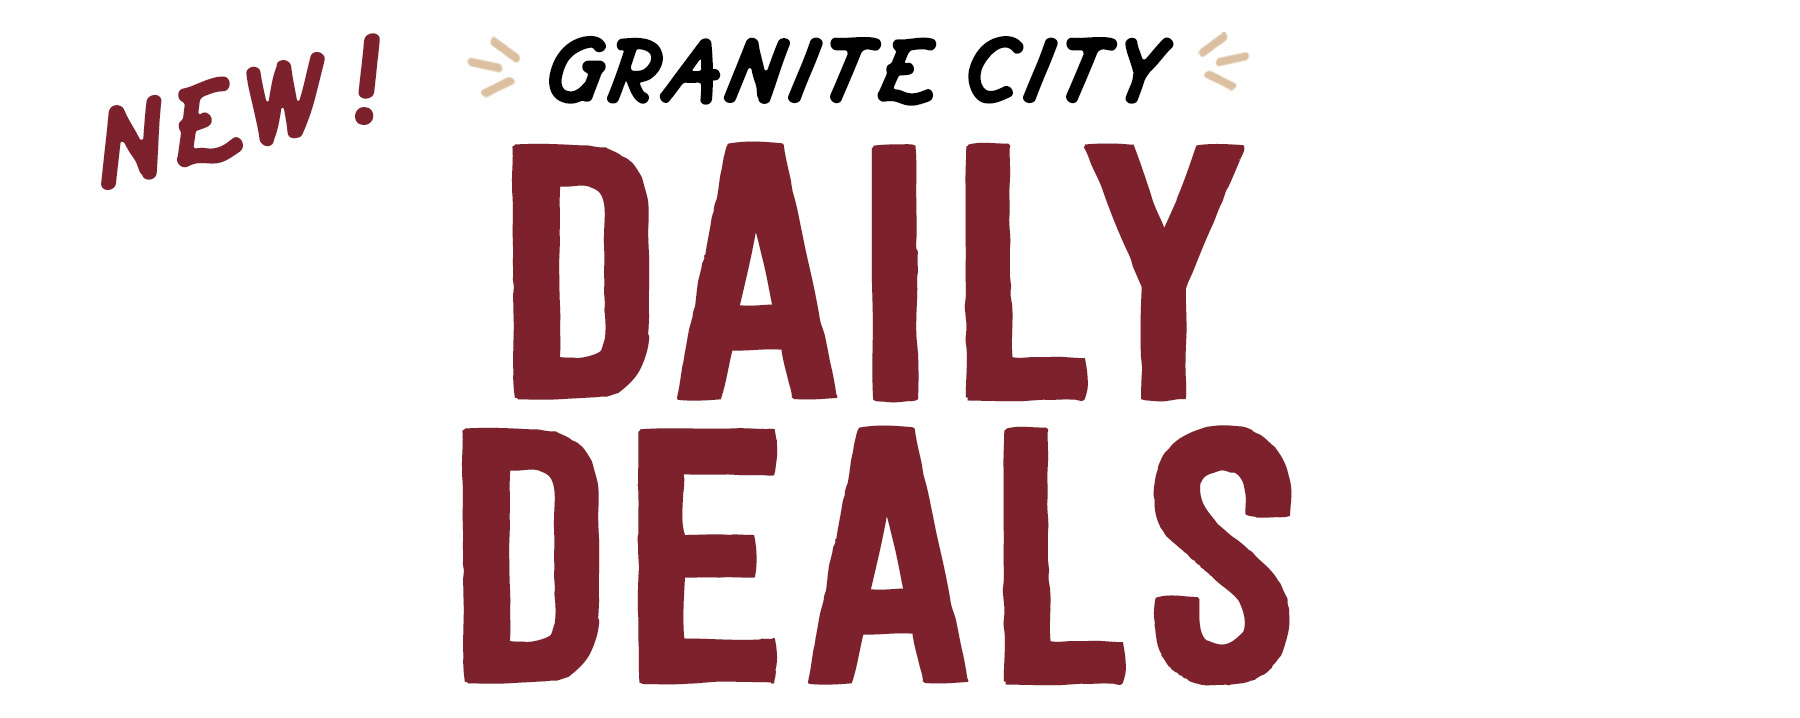 Daily Deals  Granite City Brewery